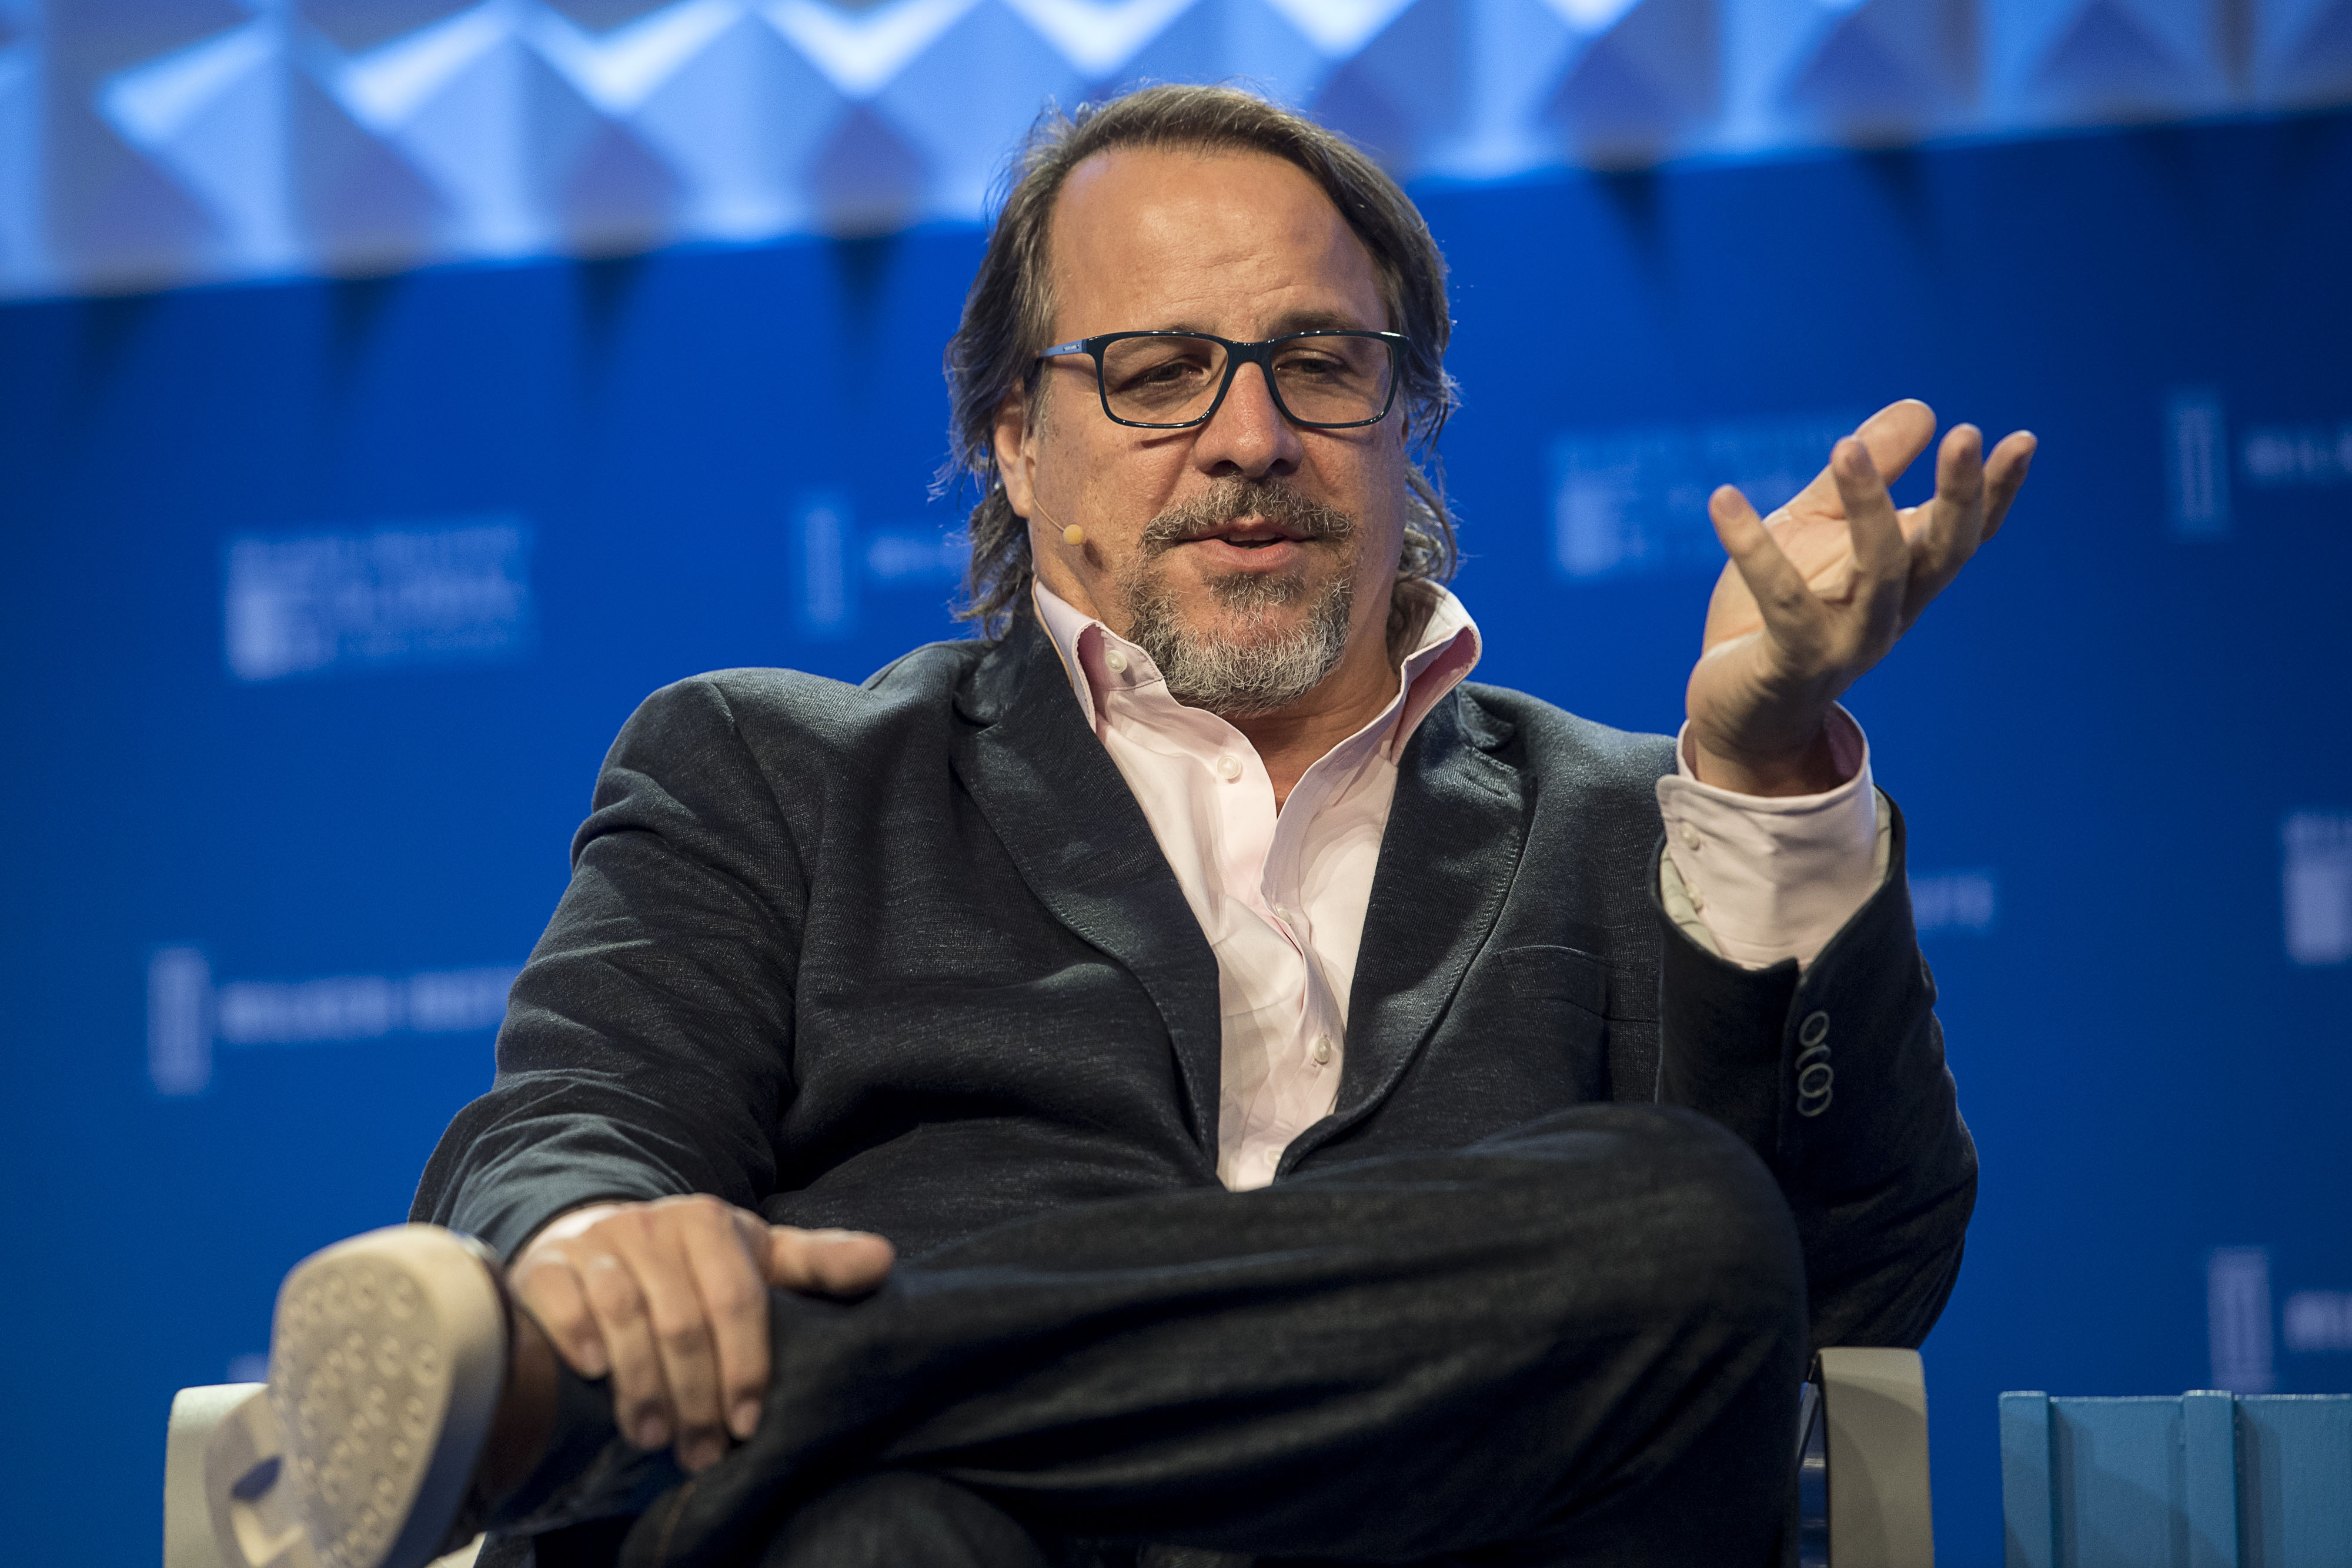 Michael Ferro, chairman and chief executive officer of Merrick Ventures LLC, speaks at the Milken Institute Global Conference in Beverly Hills, California, U.S., on Wednesday, May 3, 2017. (Bloomberg—Bloomberg via Getty Images)